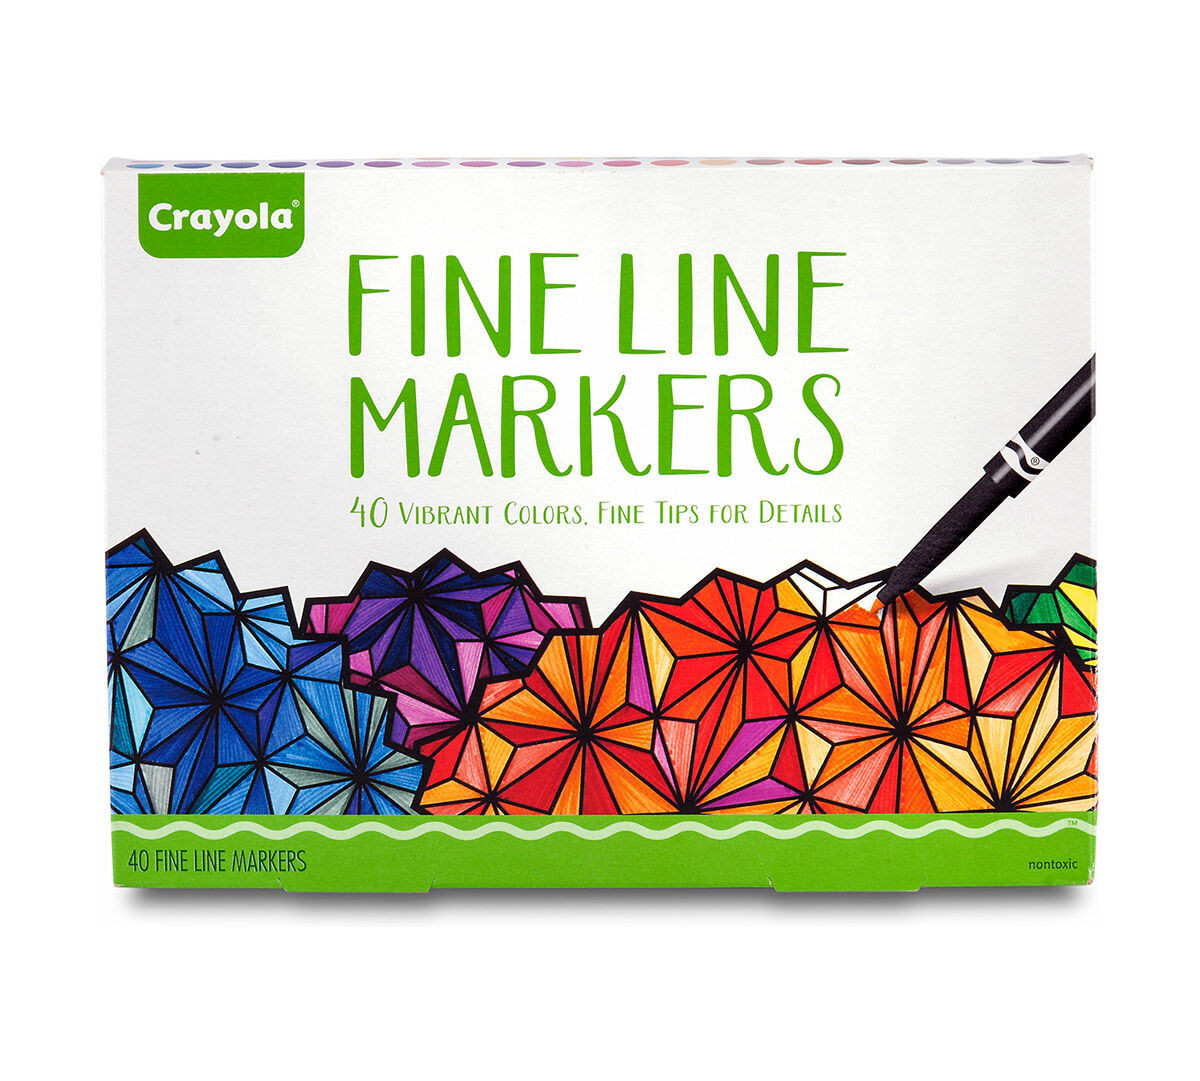 Markers For Adult Coloring Books
 Crayola 40 Ct Vibrant Fine Line Markers with fine tips